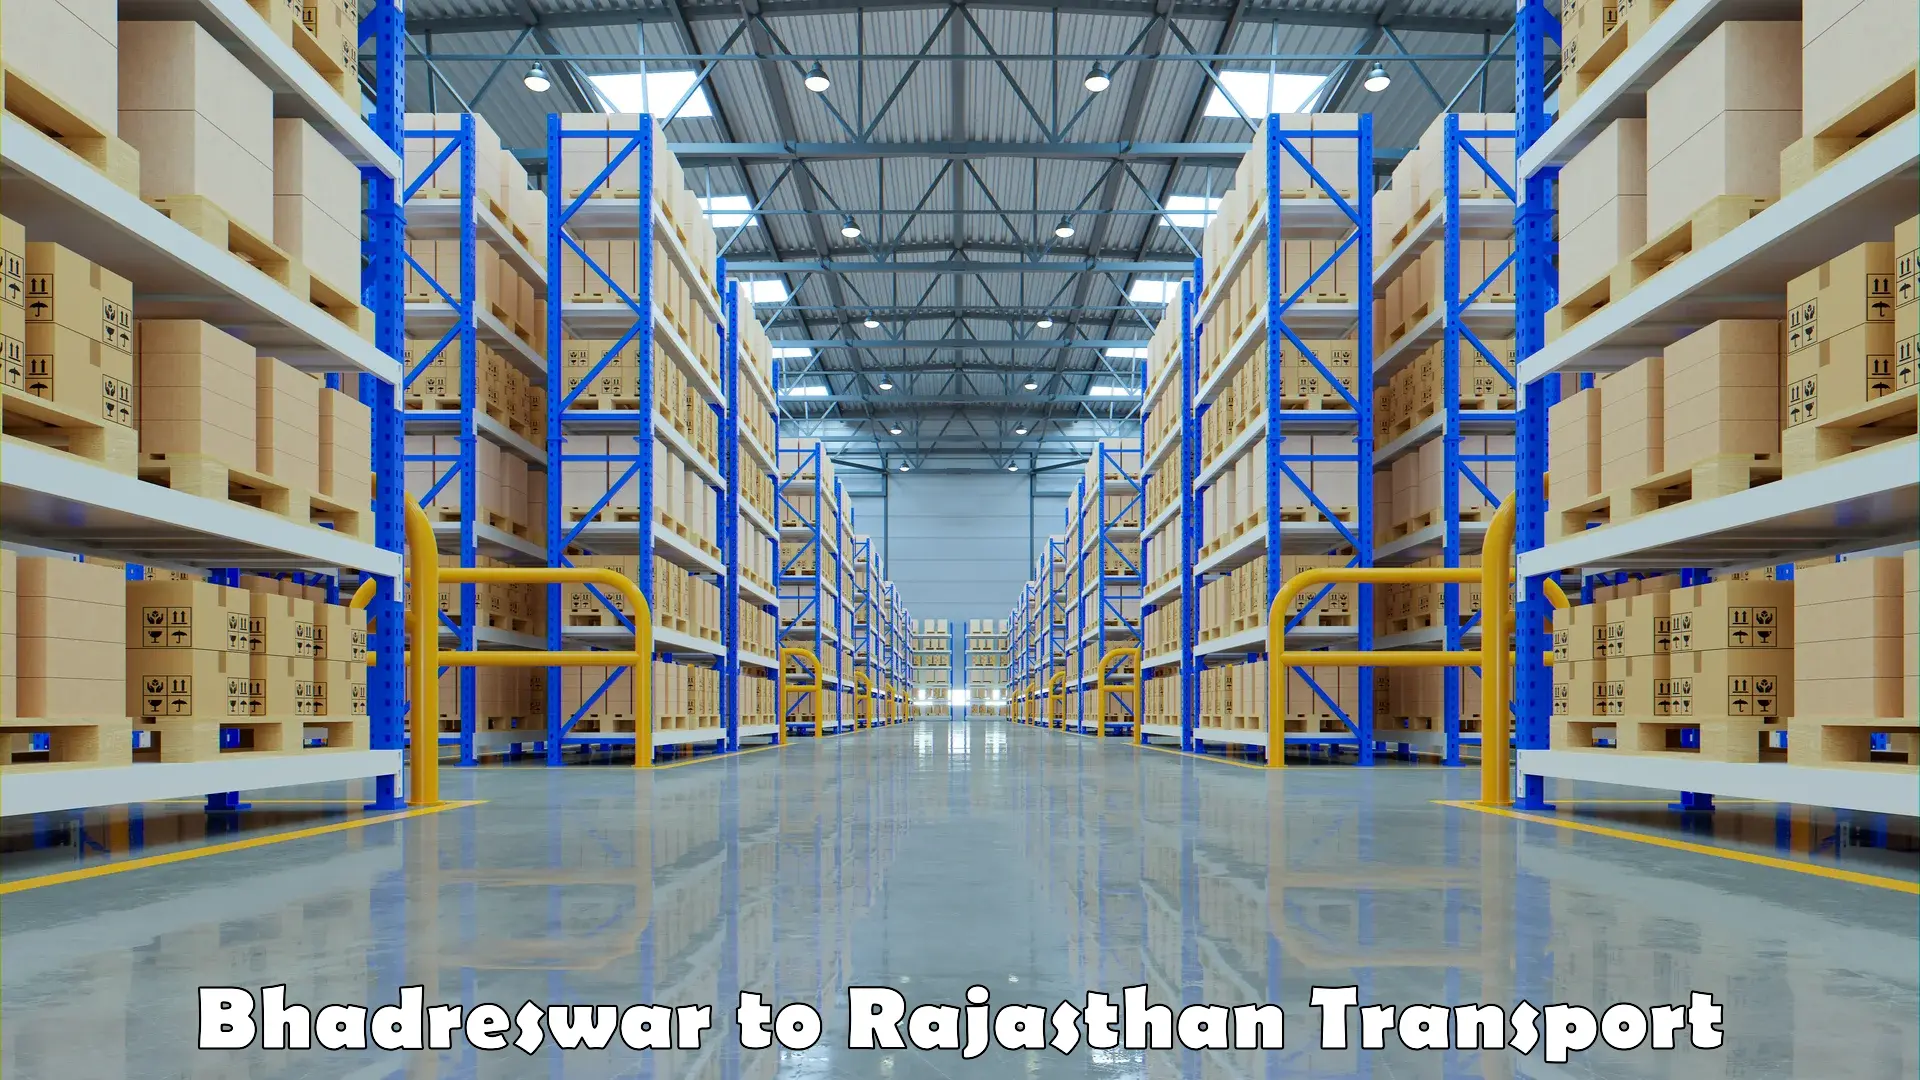 Shipping services in Bhadreswar to Bhiwadi